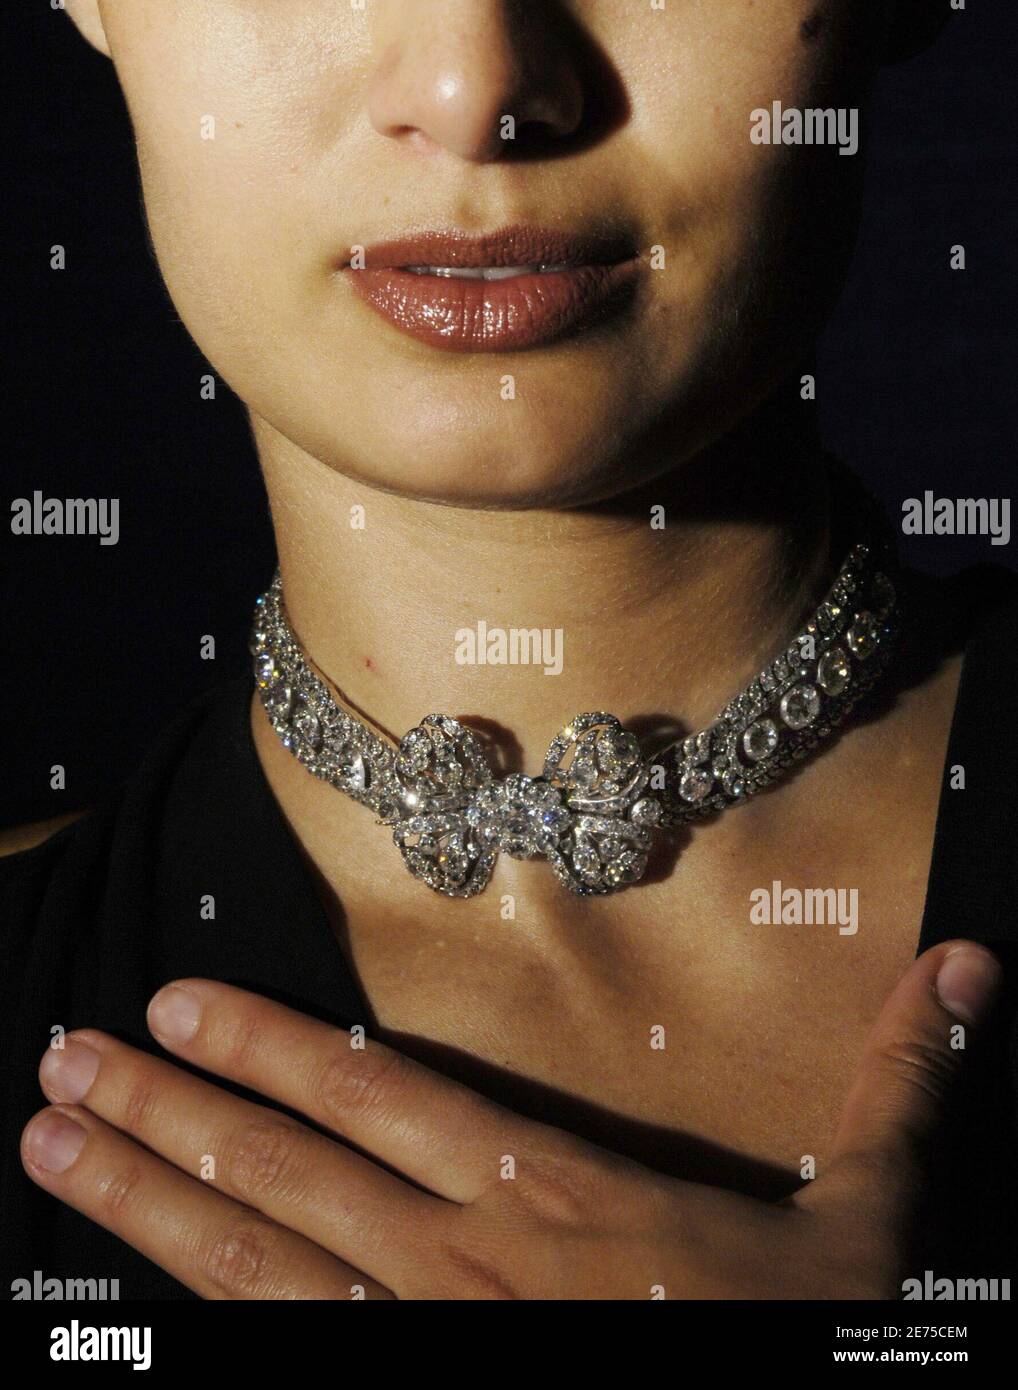 A model displays a diamond necklace from the collection of the Russian imperial family believed to have been made for Catherine the Great, Empress of Russia 1762-1796, at Sotheby's in Geneva, Switzerland, November 9, 2005. The ornament is expected to fetch between $ 1'150'000 and 1'950'000 when auctioned off in Geneva on November 17. Stock Photo